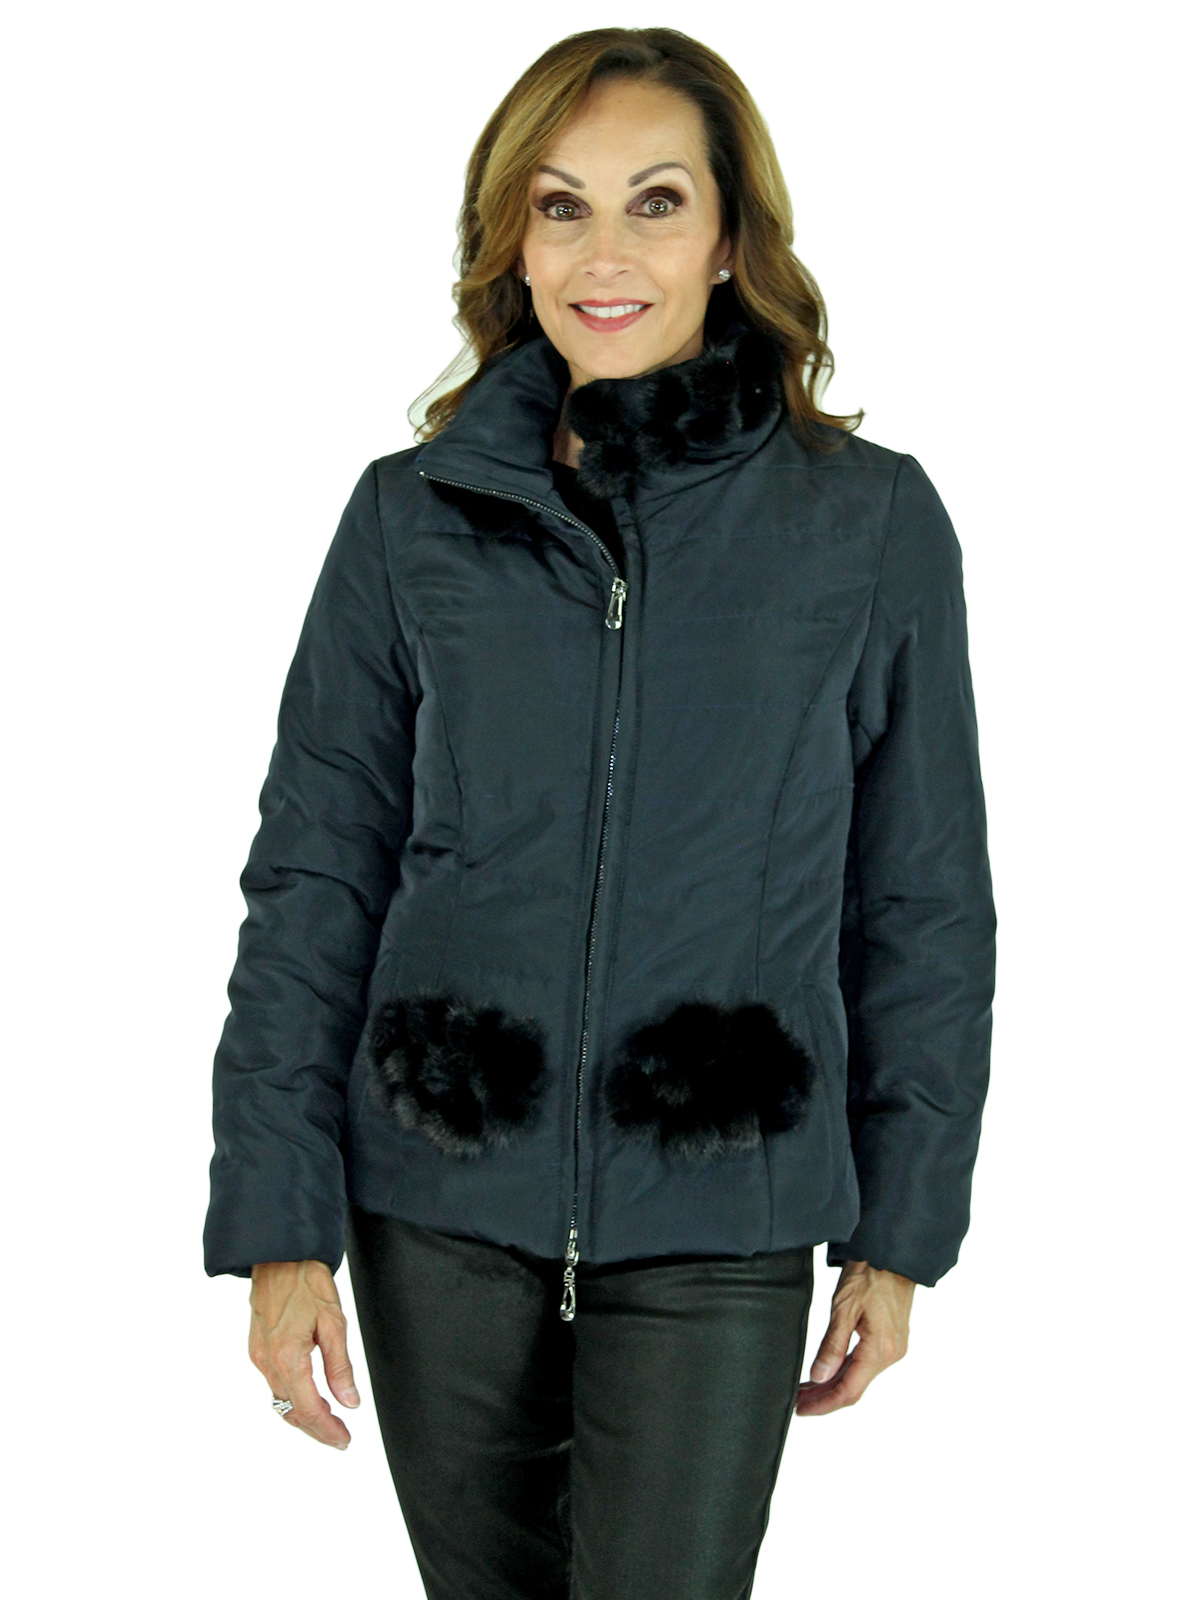 Navy Quilted Fabric Zipper Jacket w/ Mink Fur Trim | Day Furs